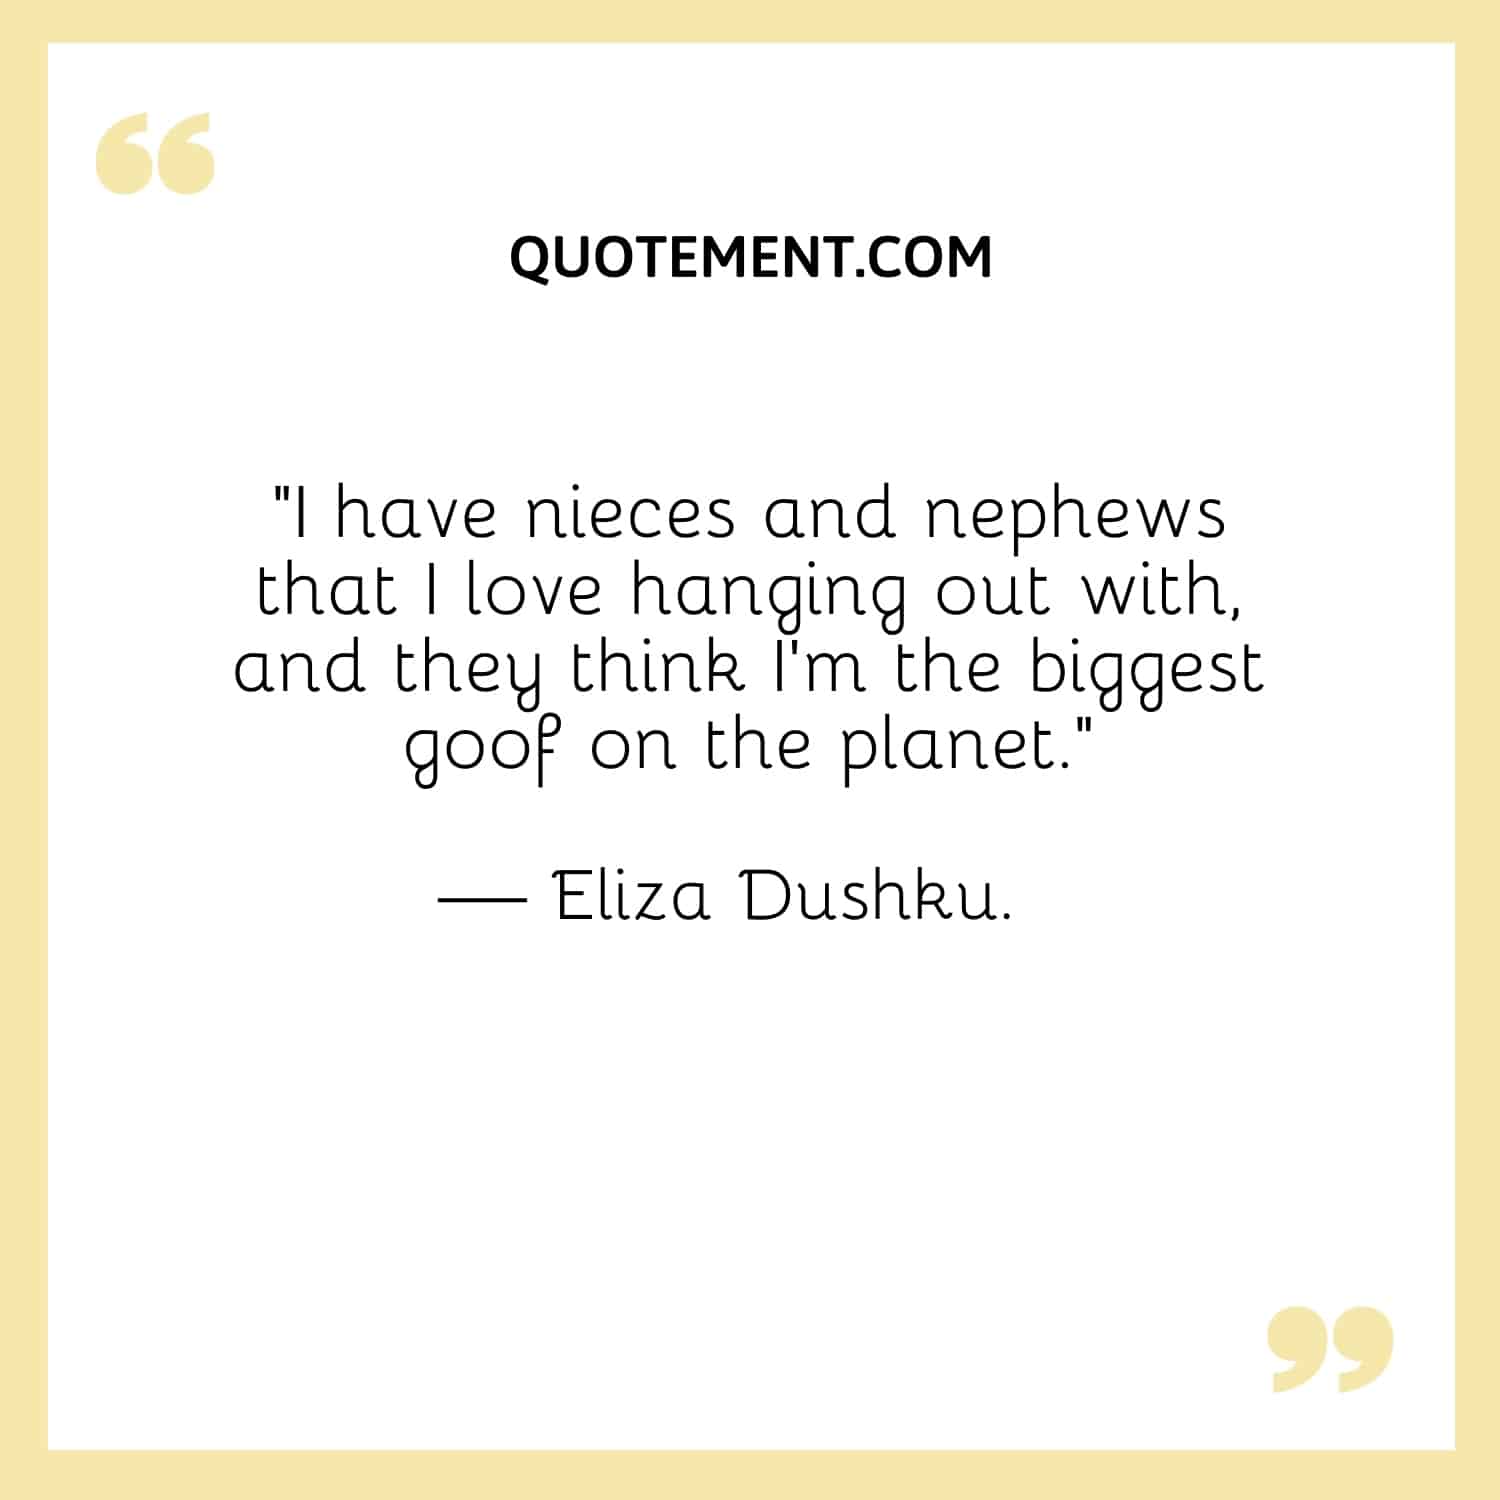 “I have nieces and nephews that I love hanging out with, and they think I’m the biggest goof on the planet.”  — Eliza Dushku